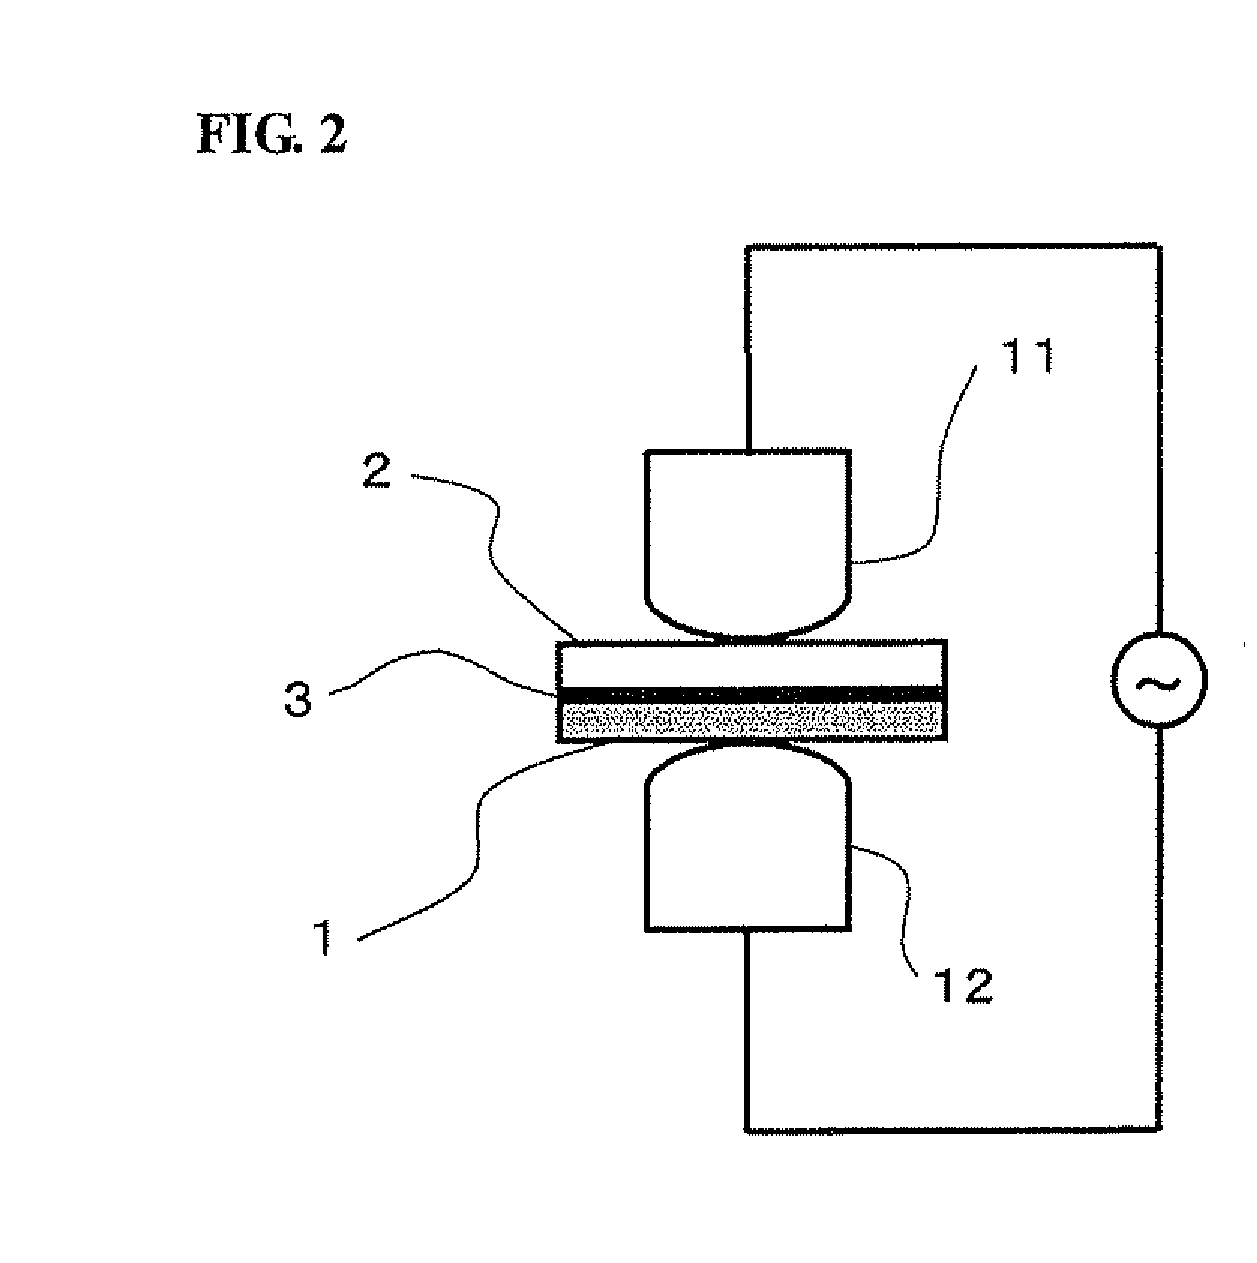 Method and apparatus for bonding dissimilar materials made from metals